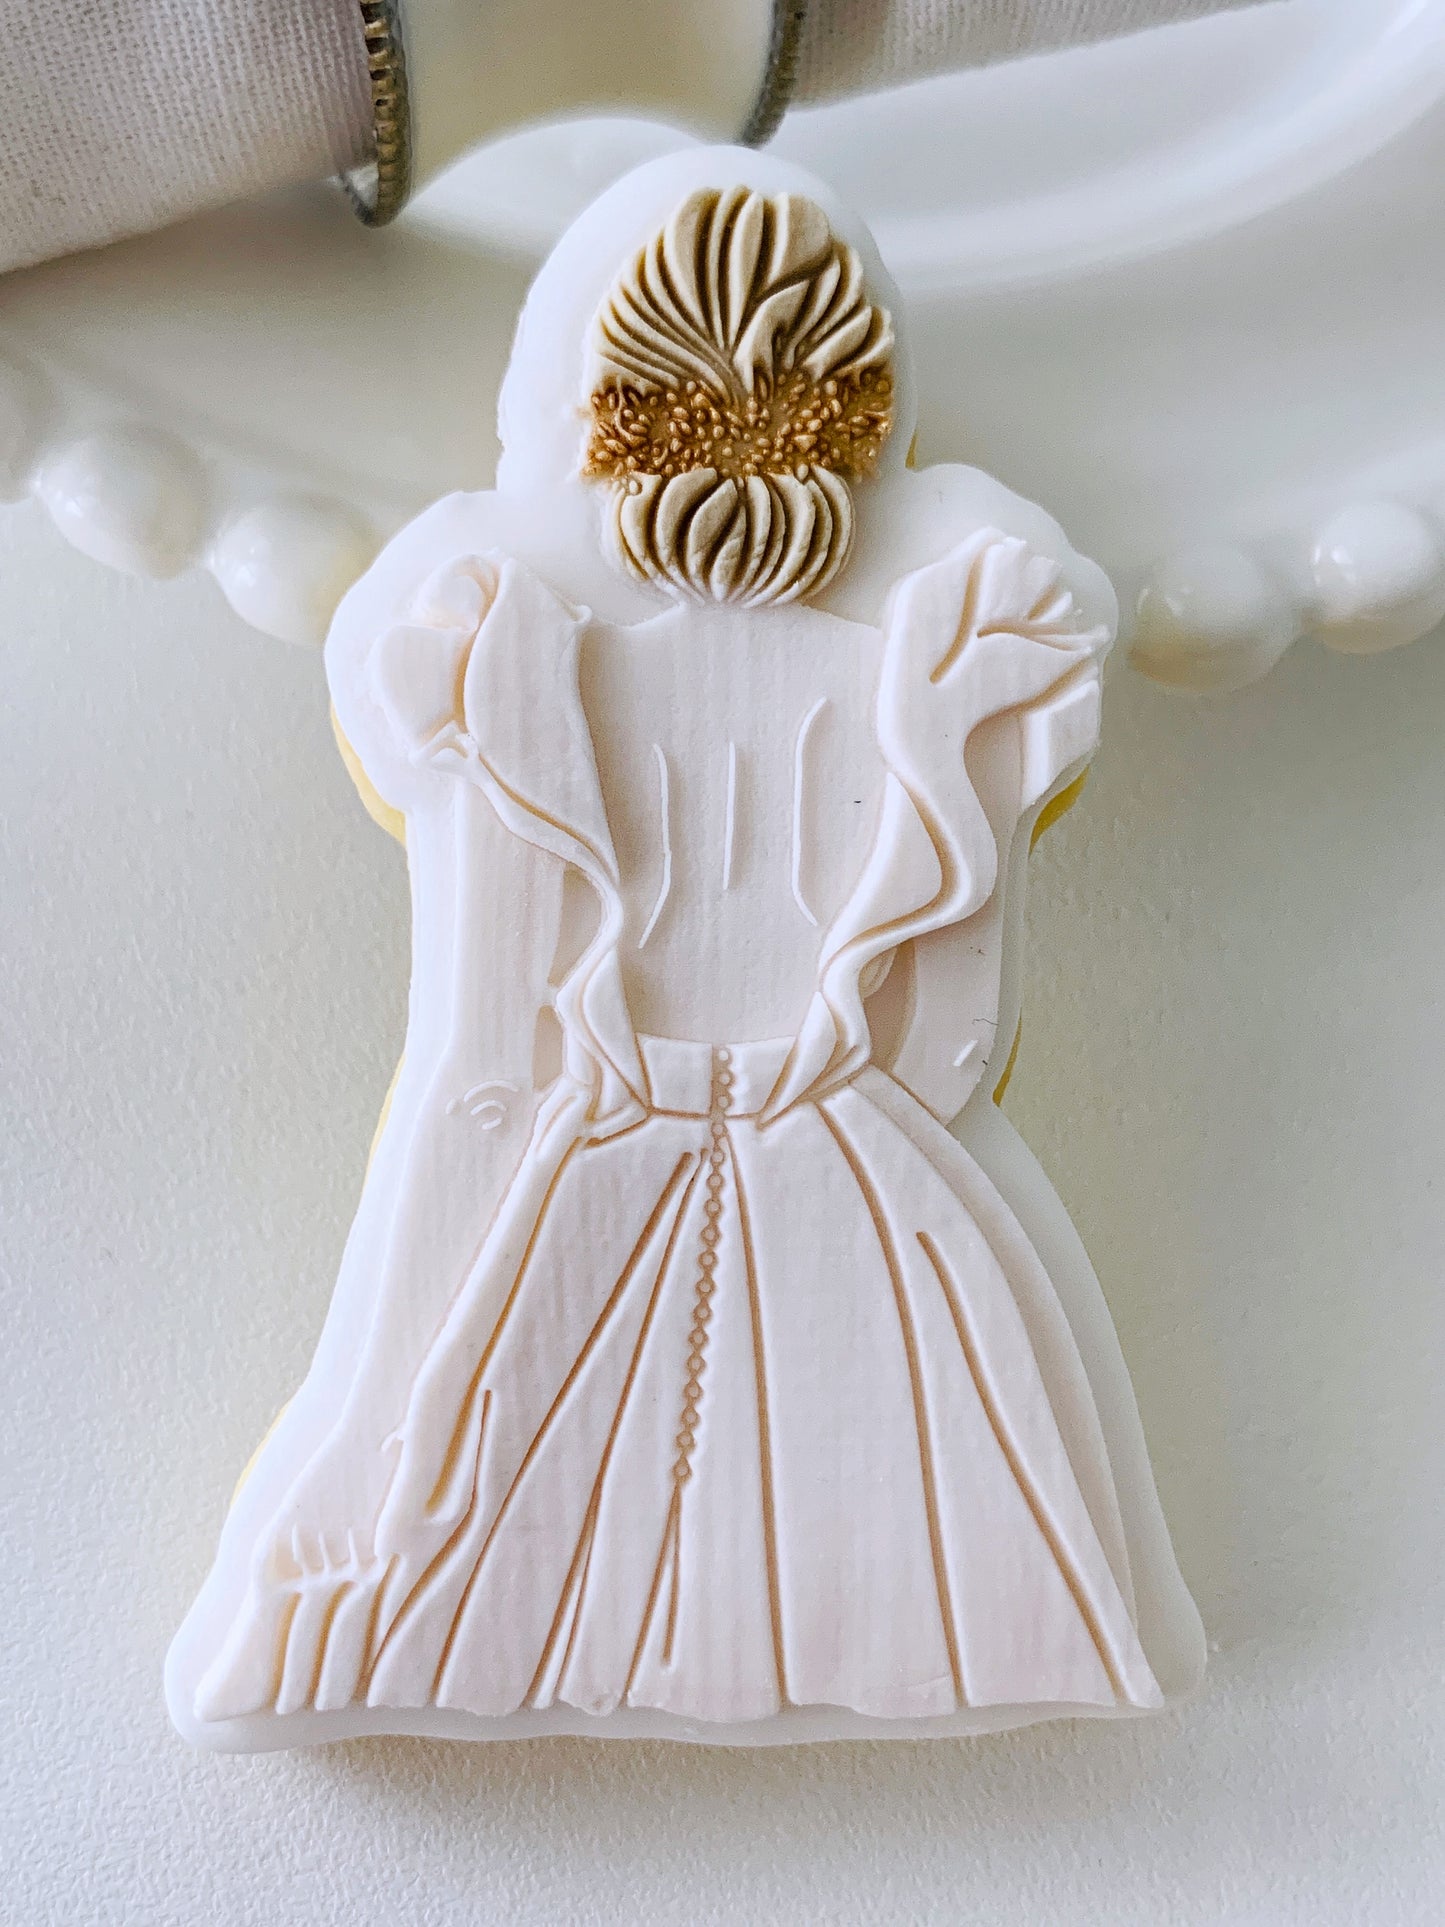 Woman in Frilled Sleeve Dress Cookie Stamp & Cutter